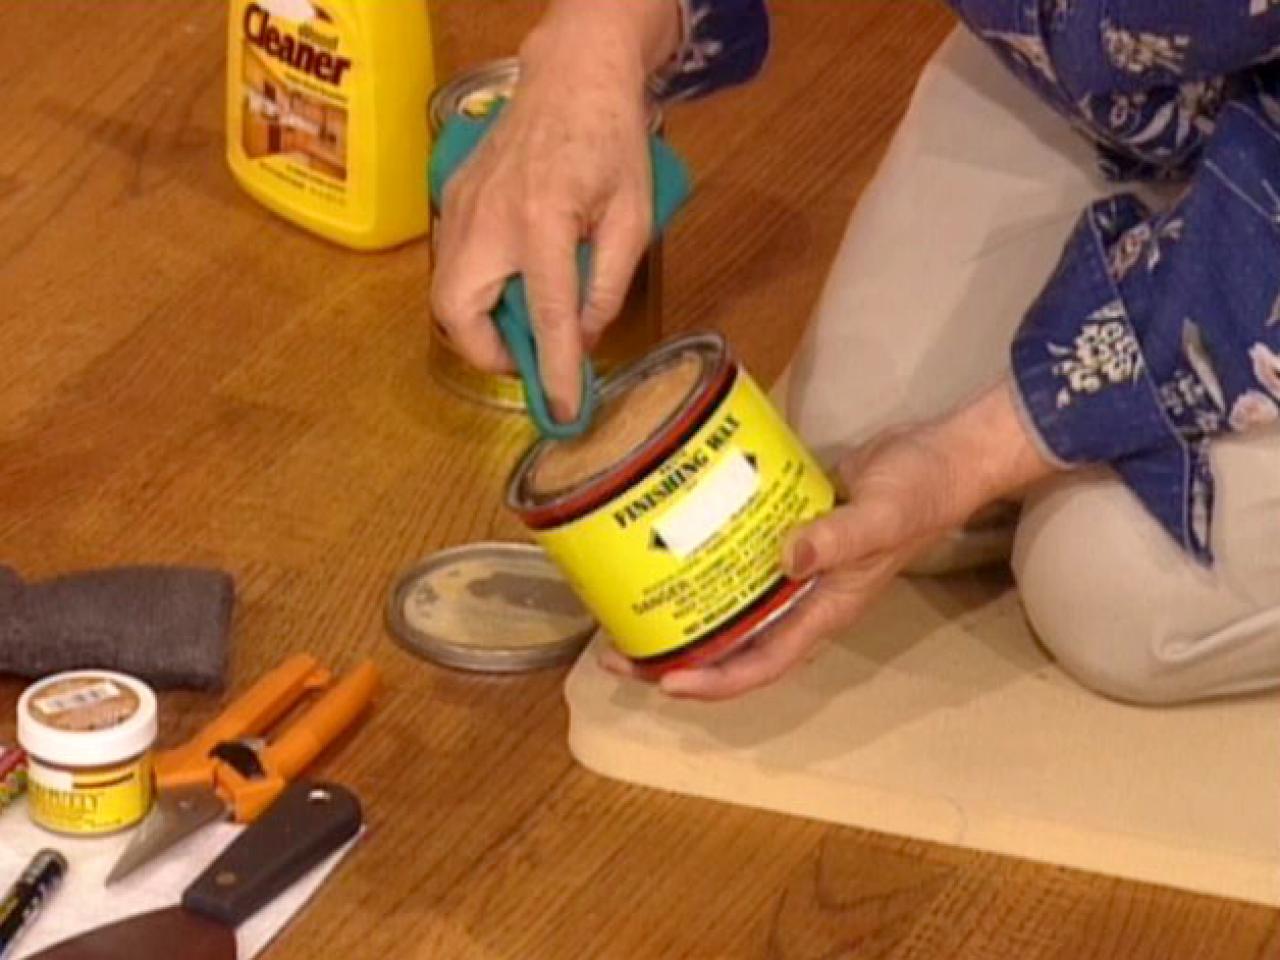 How To Touch Up Wood Floors Tos Diy, How To Remove Scratches From Prefinished Hardwood Floor